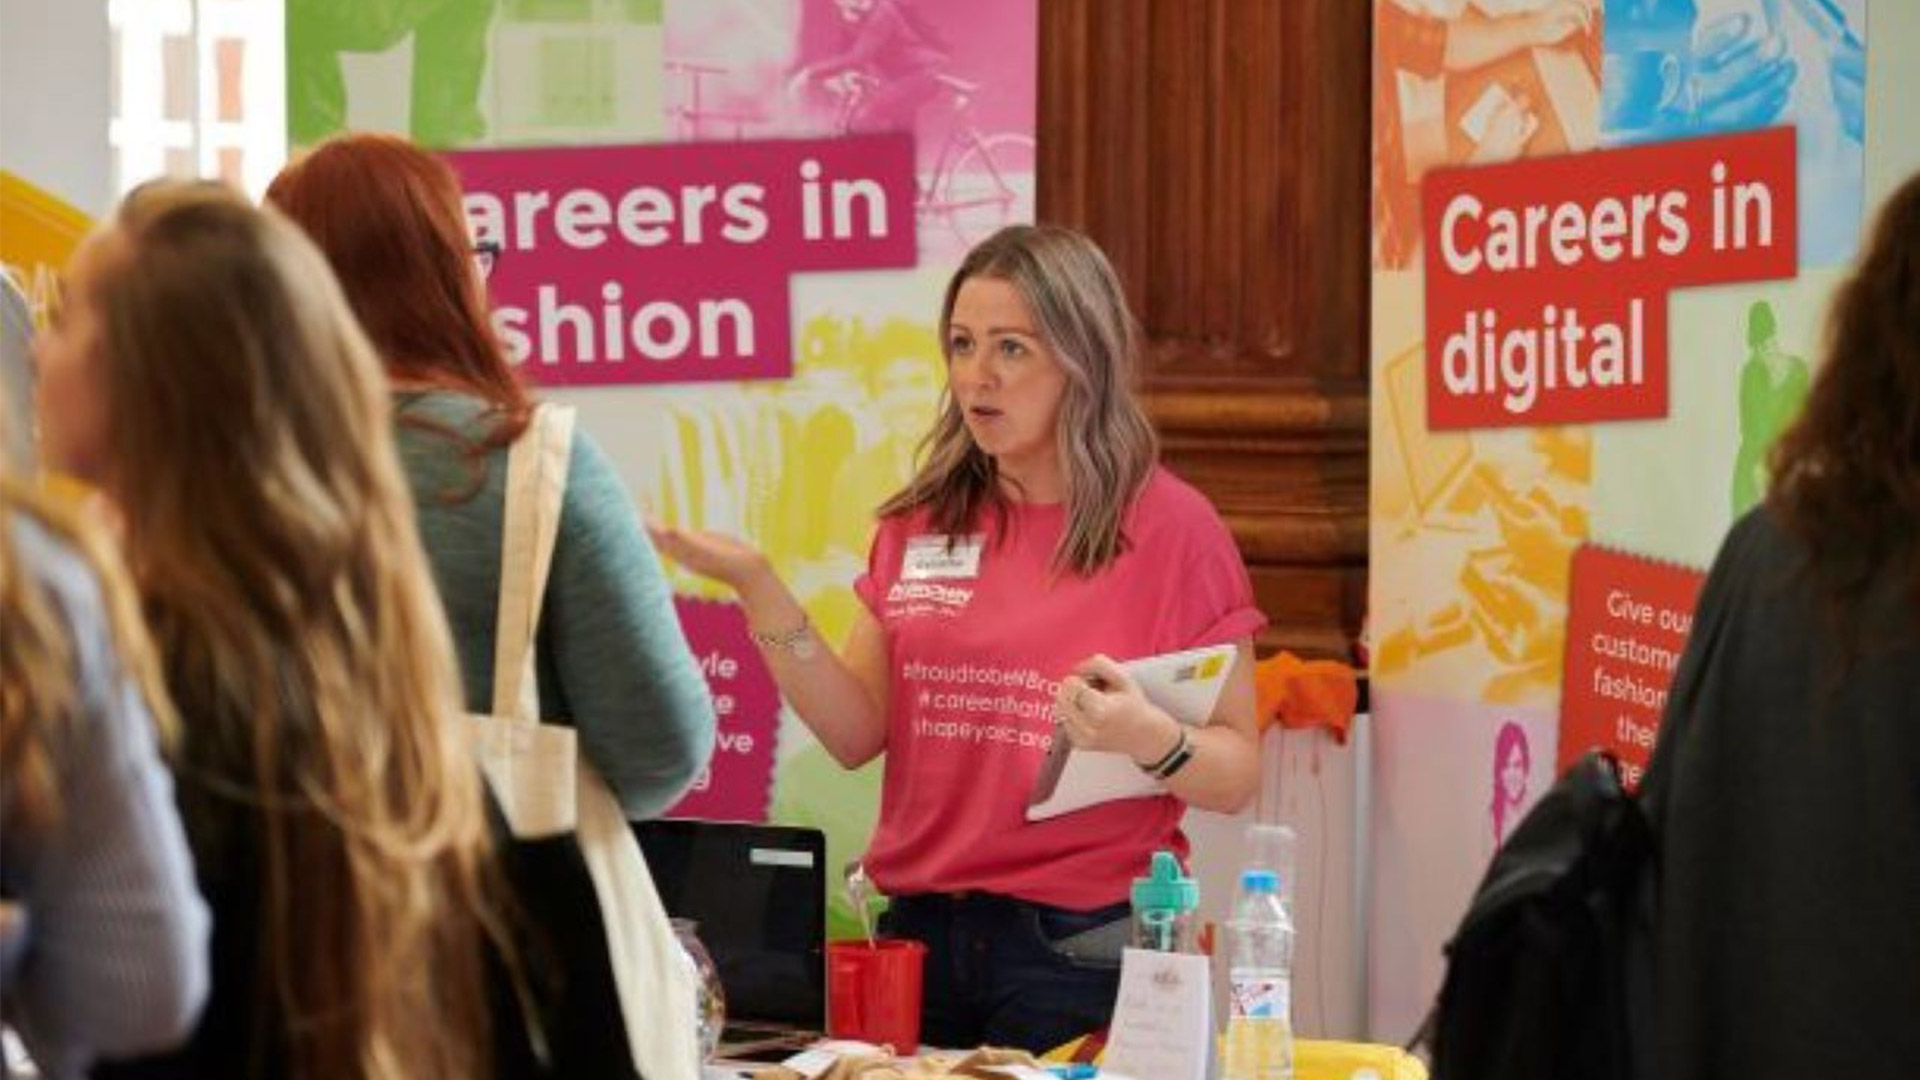 an advisor helping someone at a careers stand